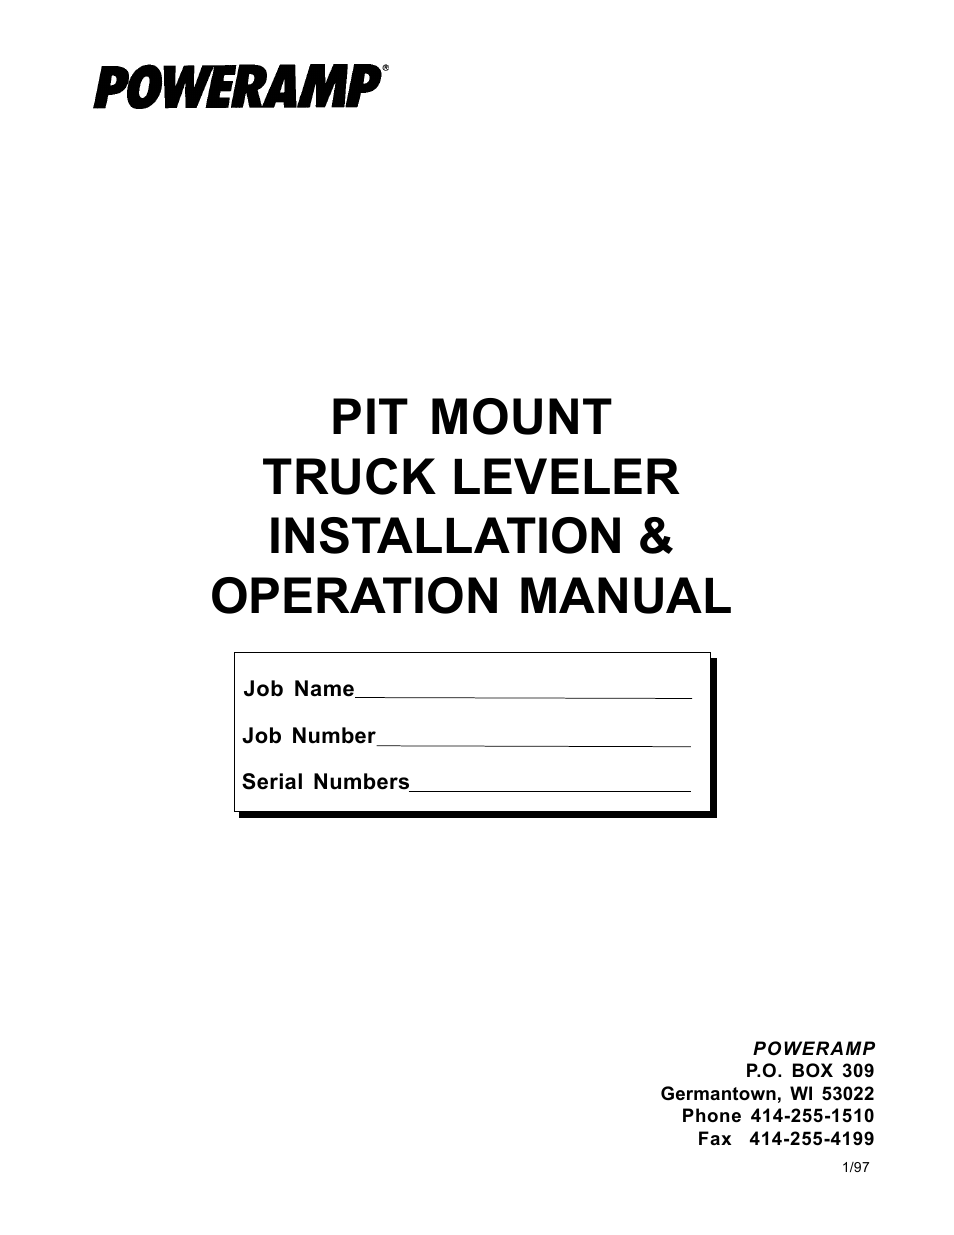 PIT MOUNTED TRUCK SPECIALTY